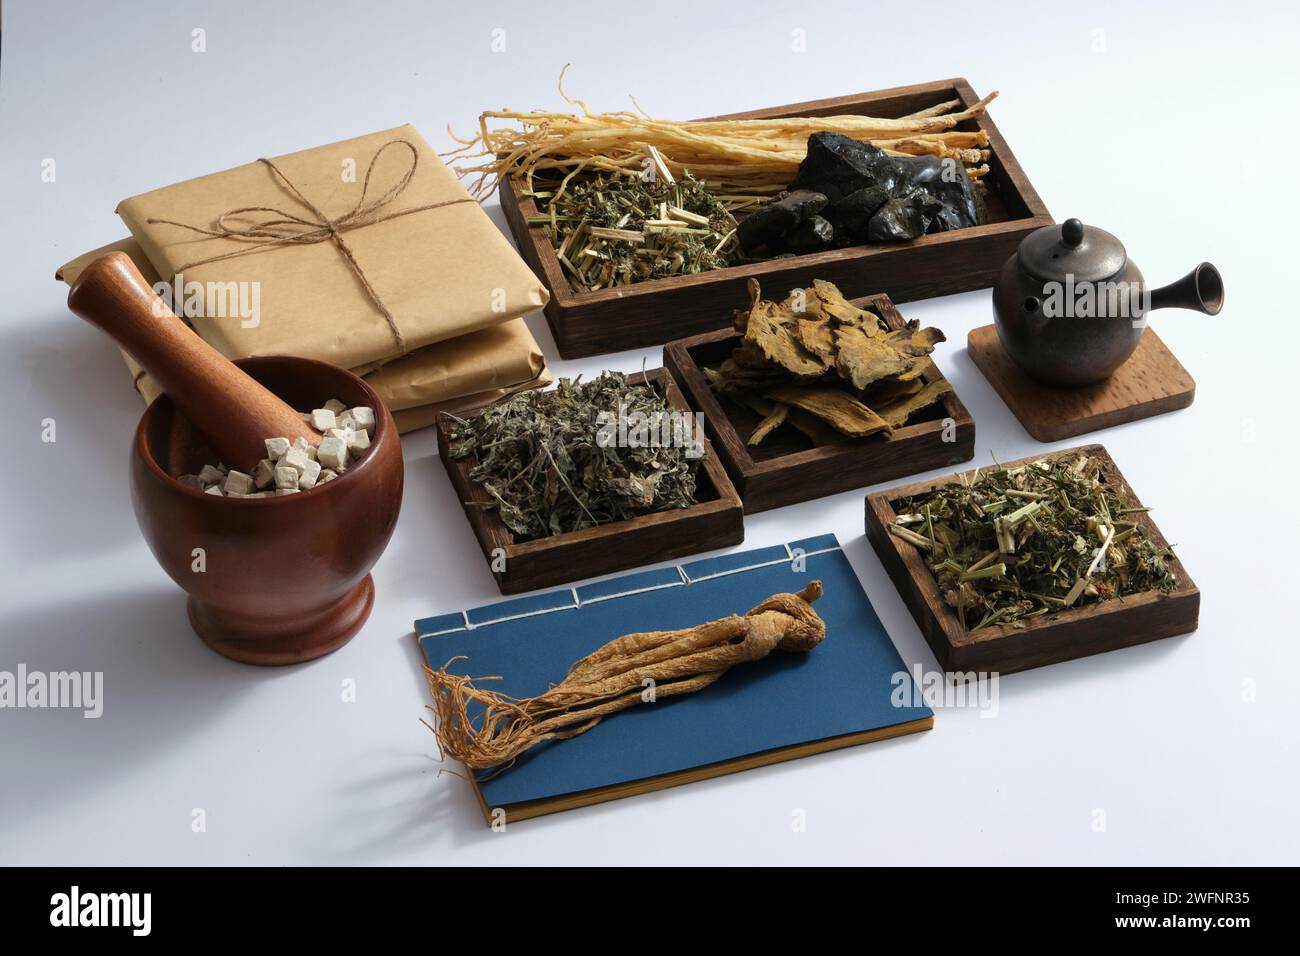 Some wooden trays with many types of herb placed on, displayed with earthen pot, medicine packs, ancient Chinese medicine books, mortar and pestle. Ch Stock Photo